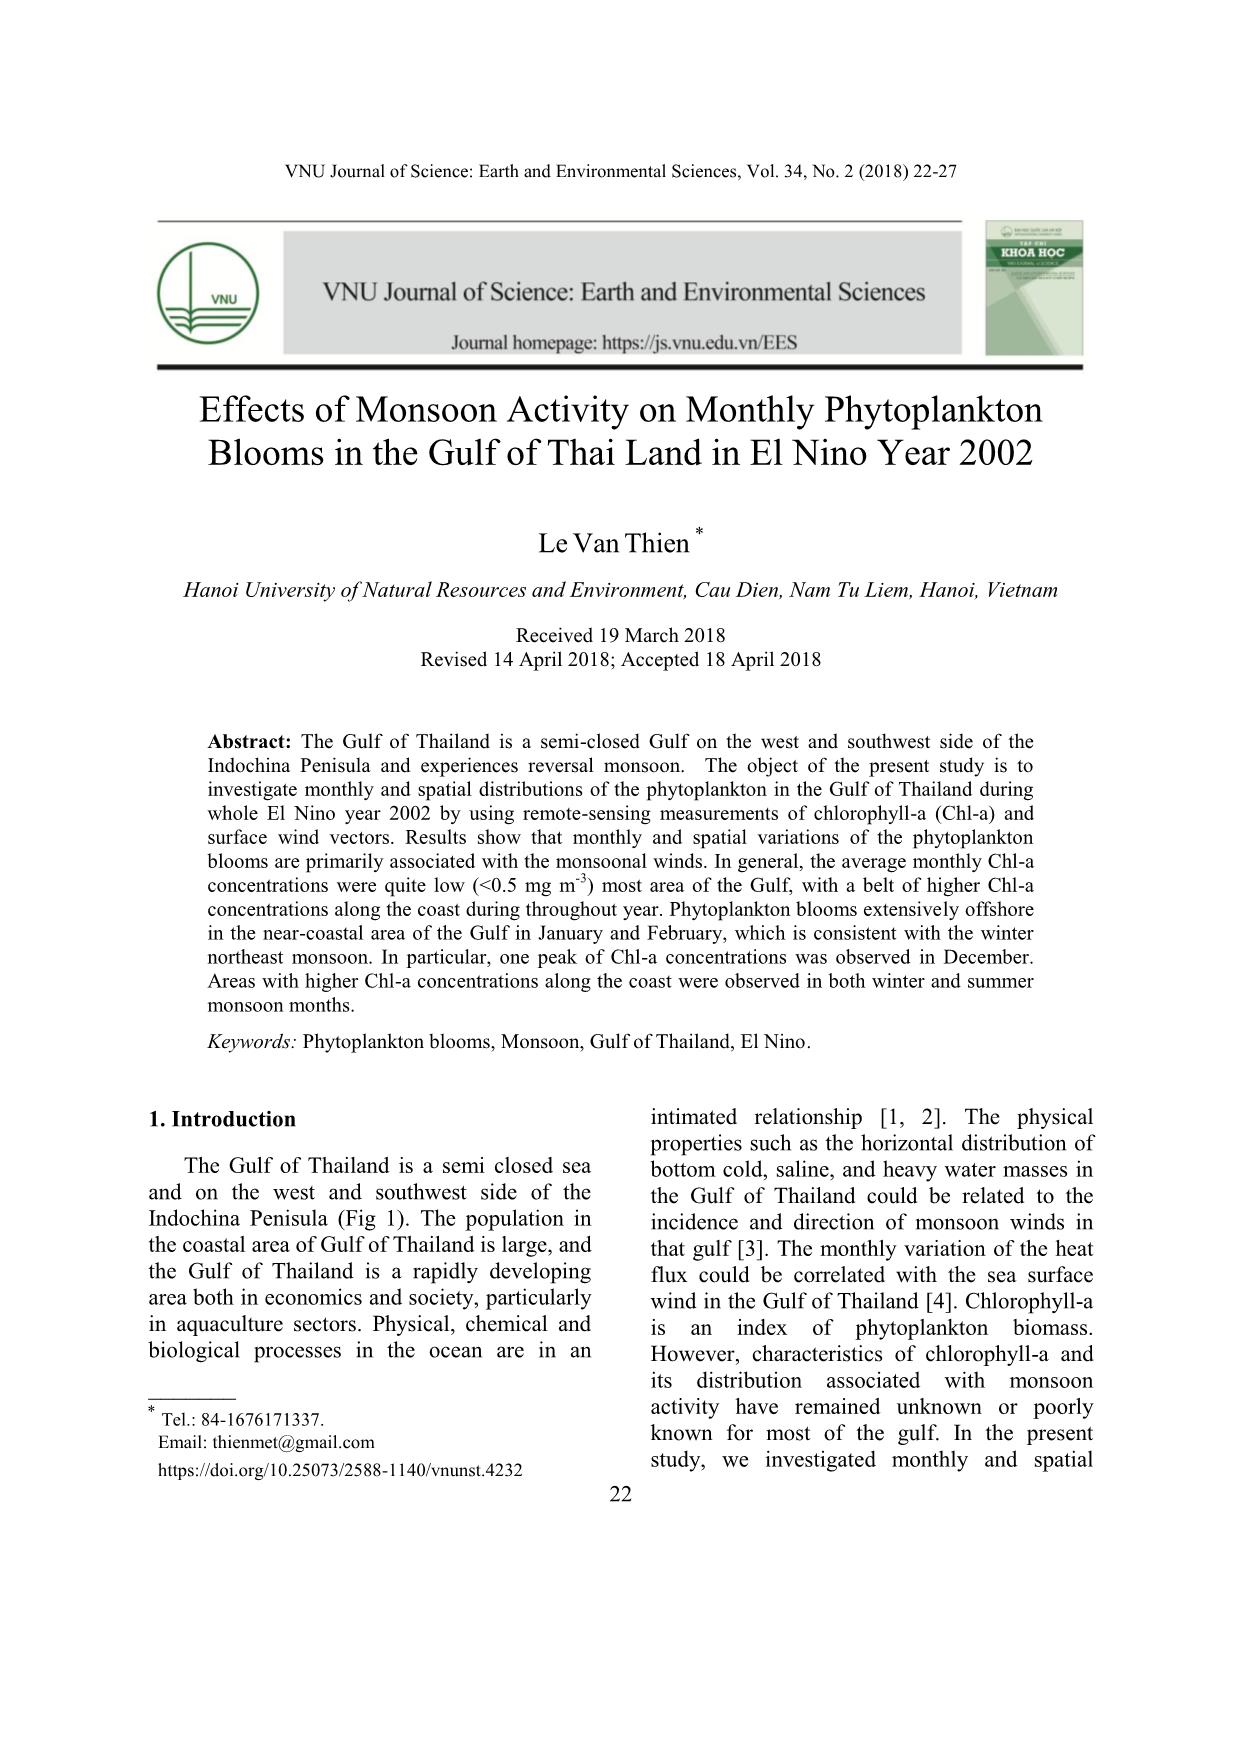 Effects of Monsoon Activity on Monthly Phytoplankton Blooms in the Gulf of Thai Land in El Nino Year 2002 trang 1